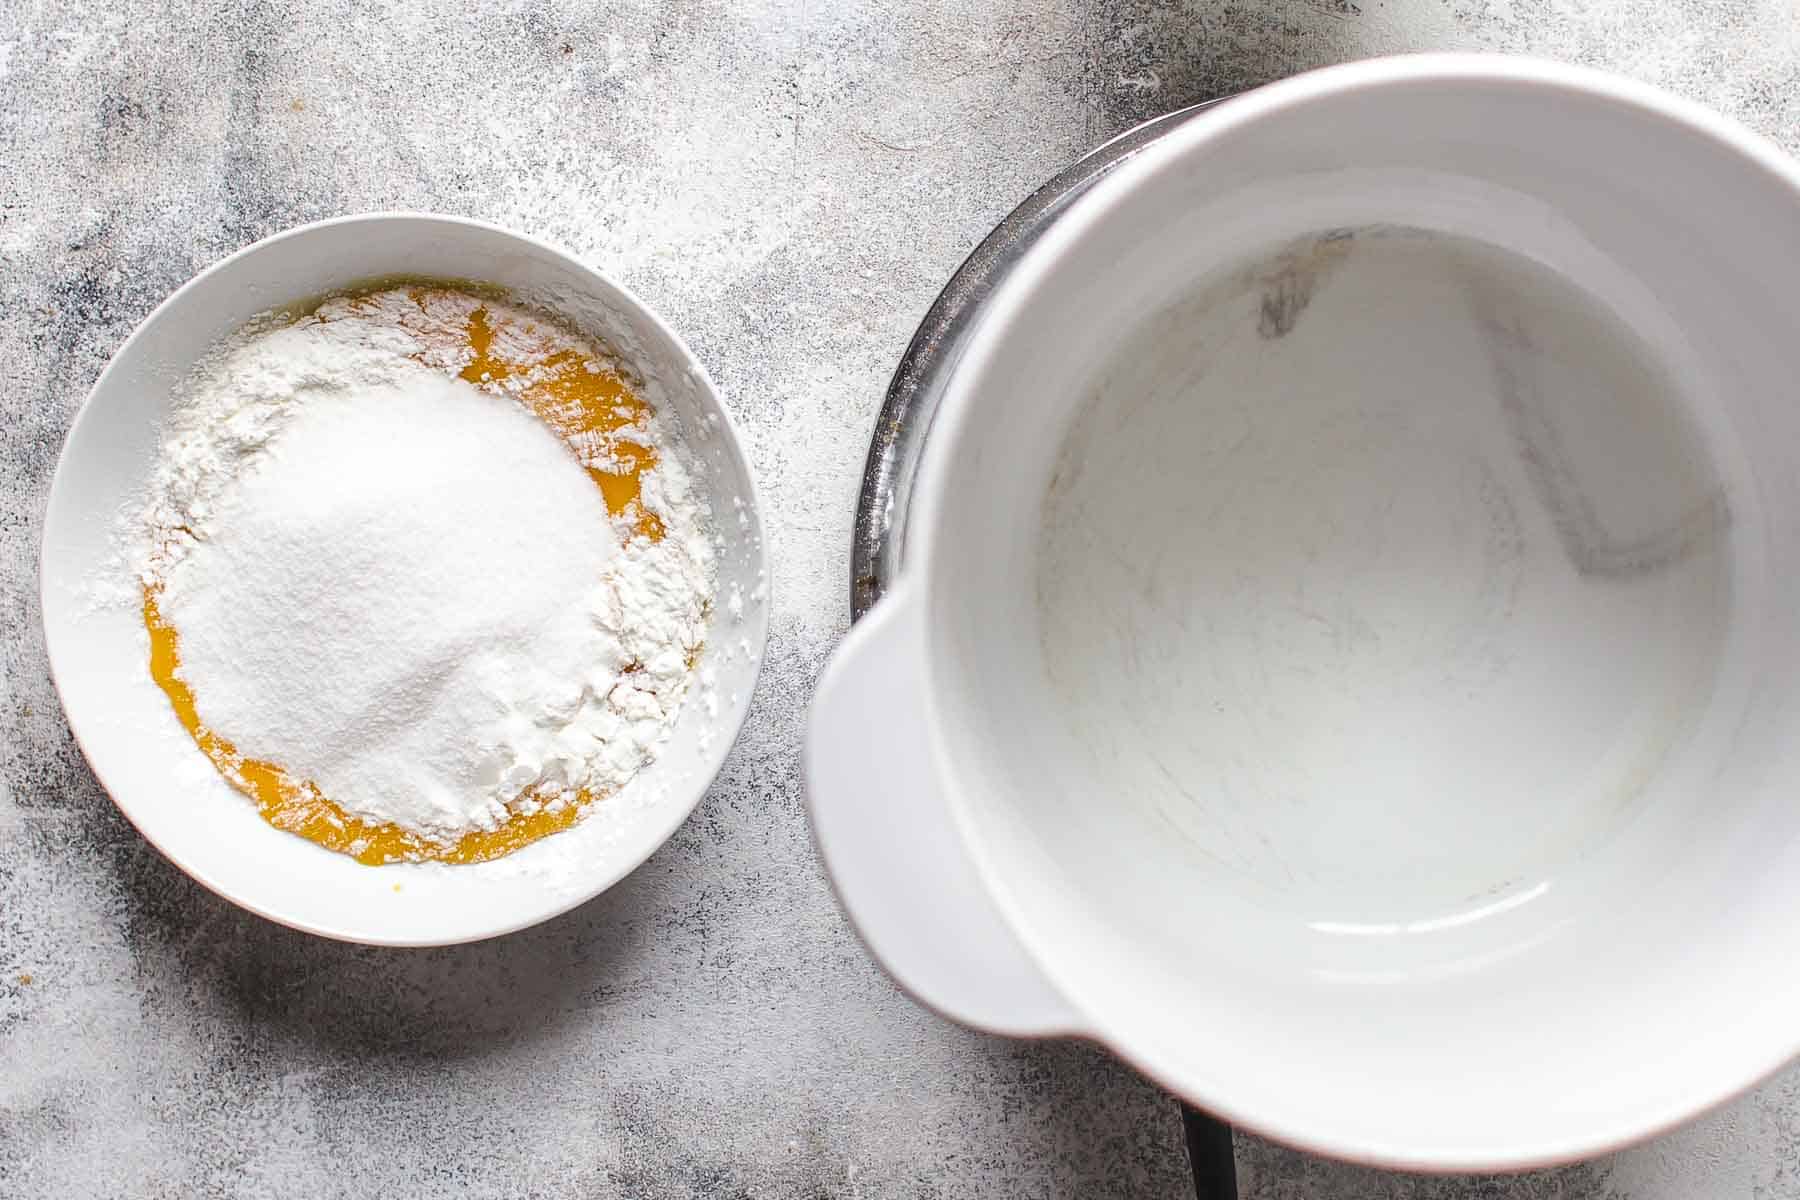 yolks, sugar, and cornstarch in a bowl sitting next to a pot